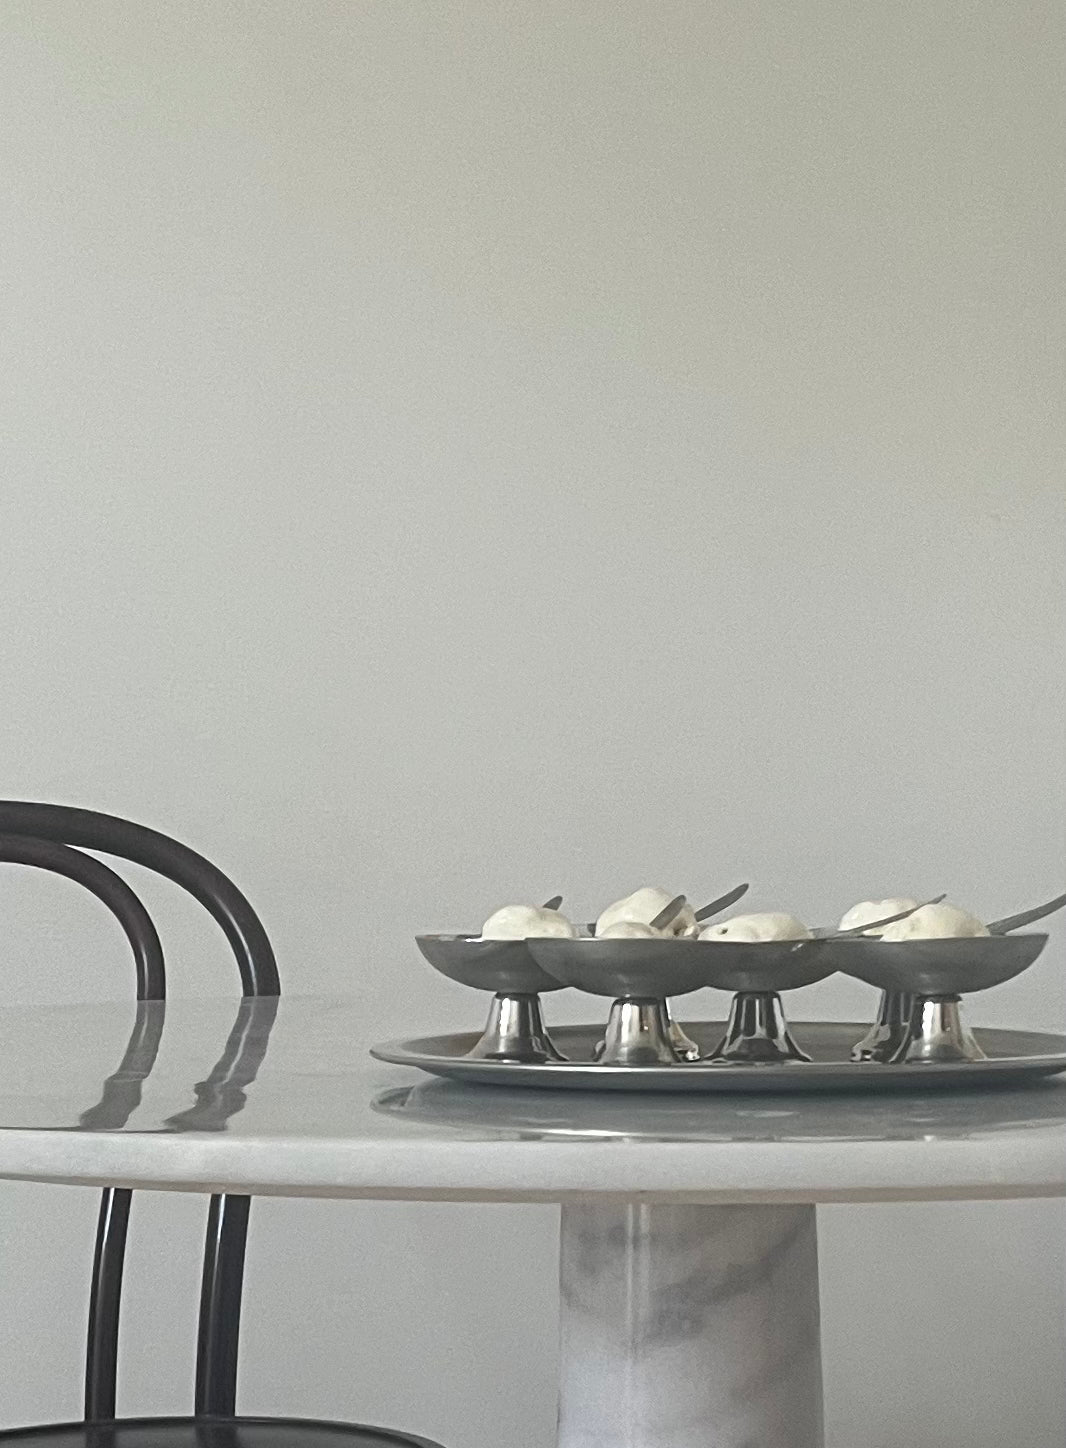 Steel Ice Cream Cups on Tray by Guy Degrenne